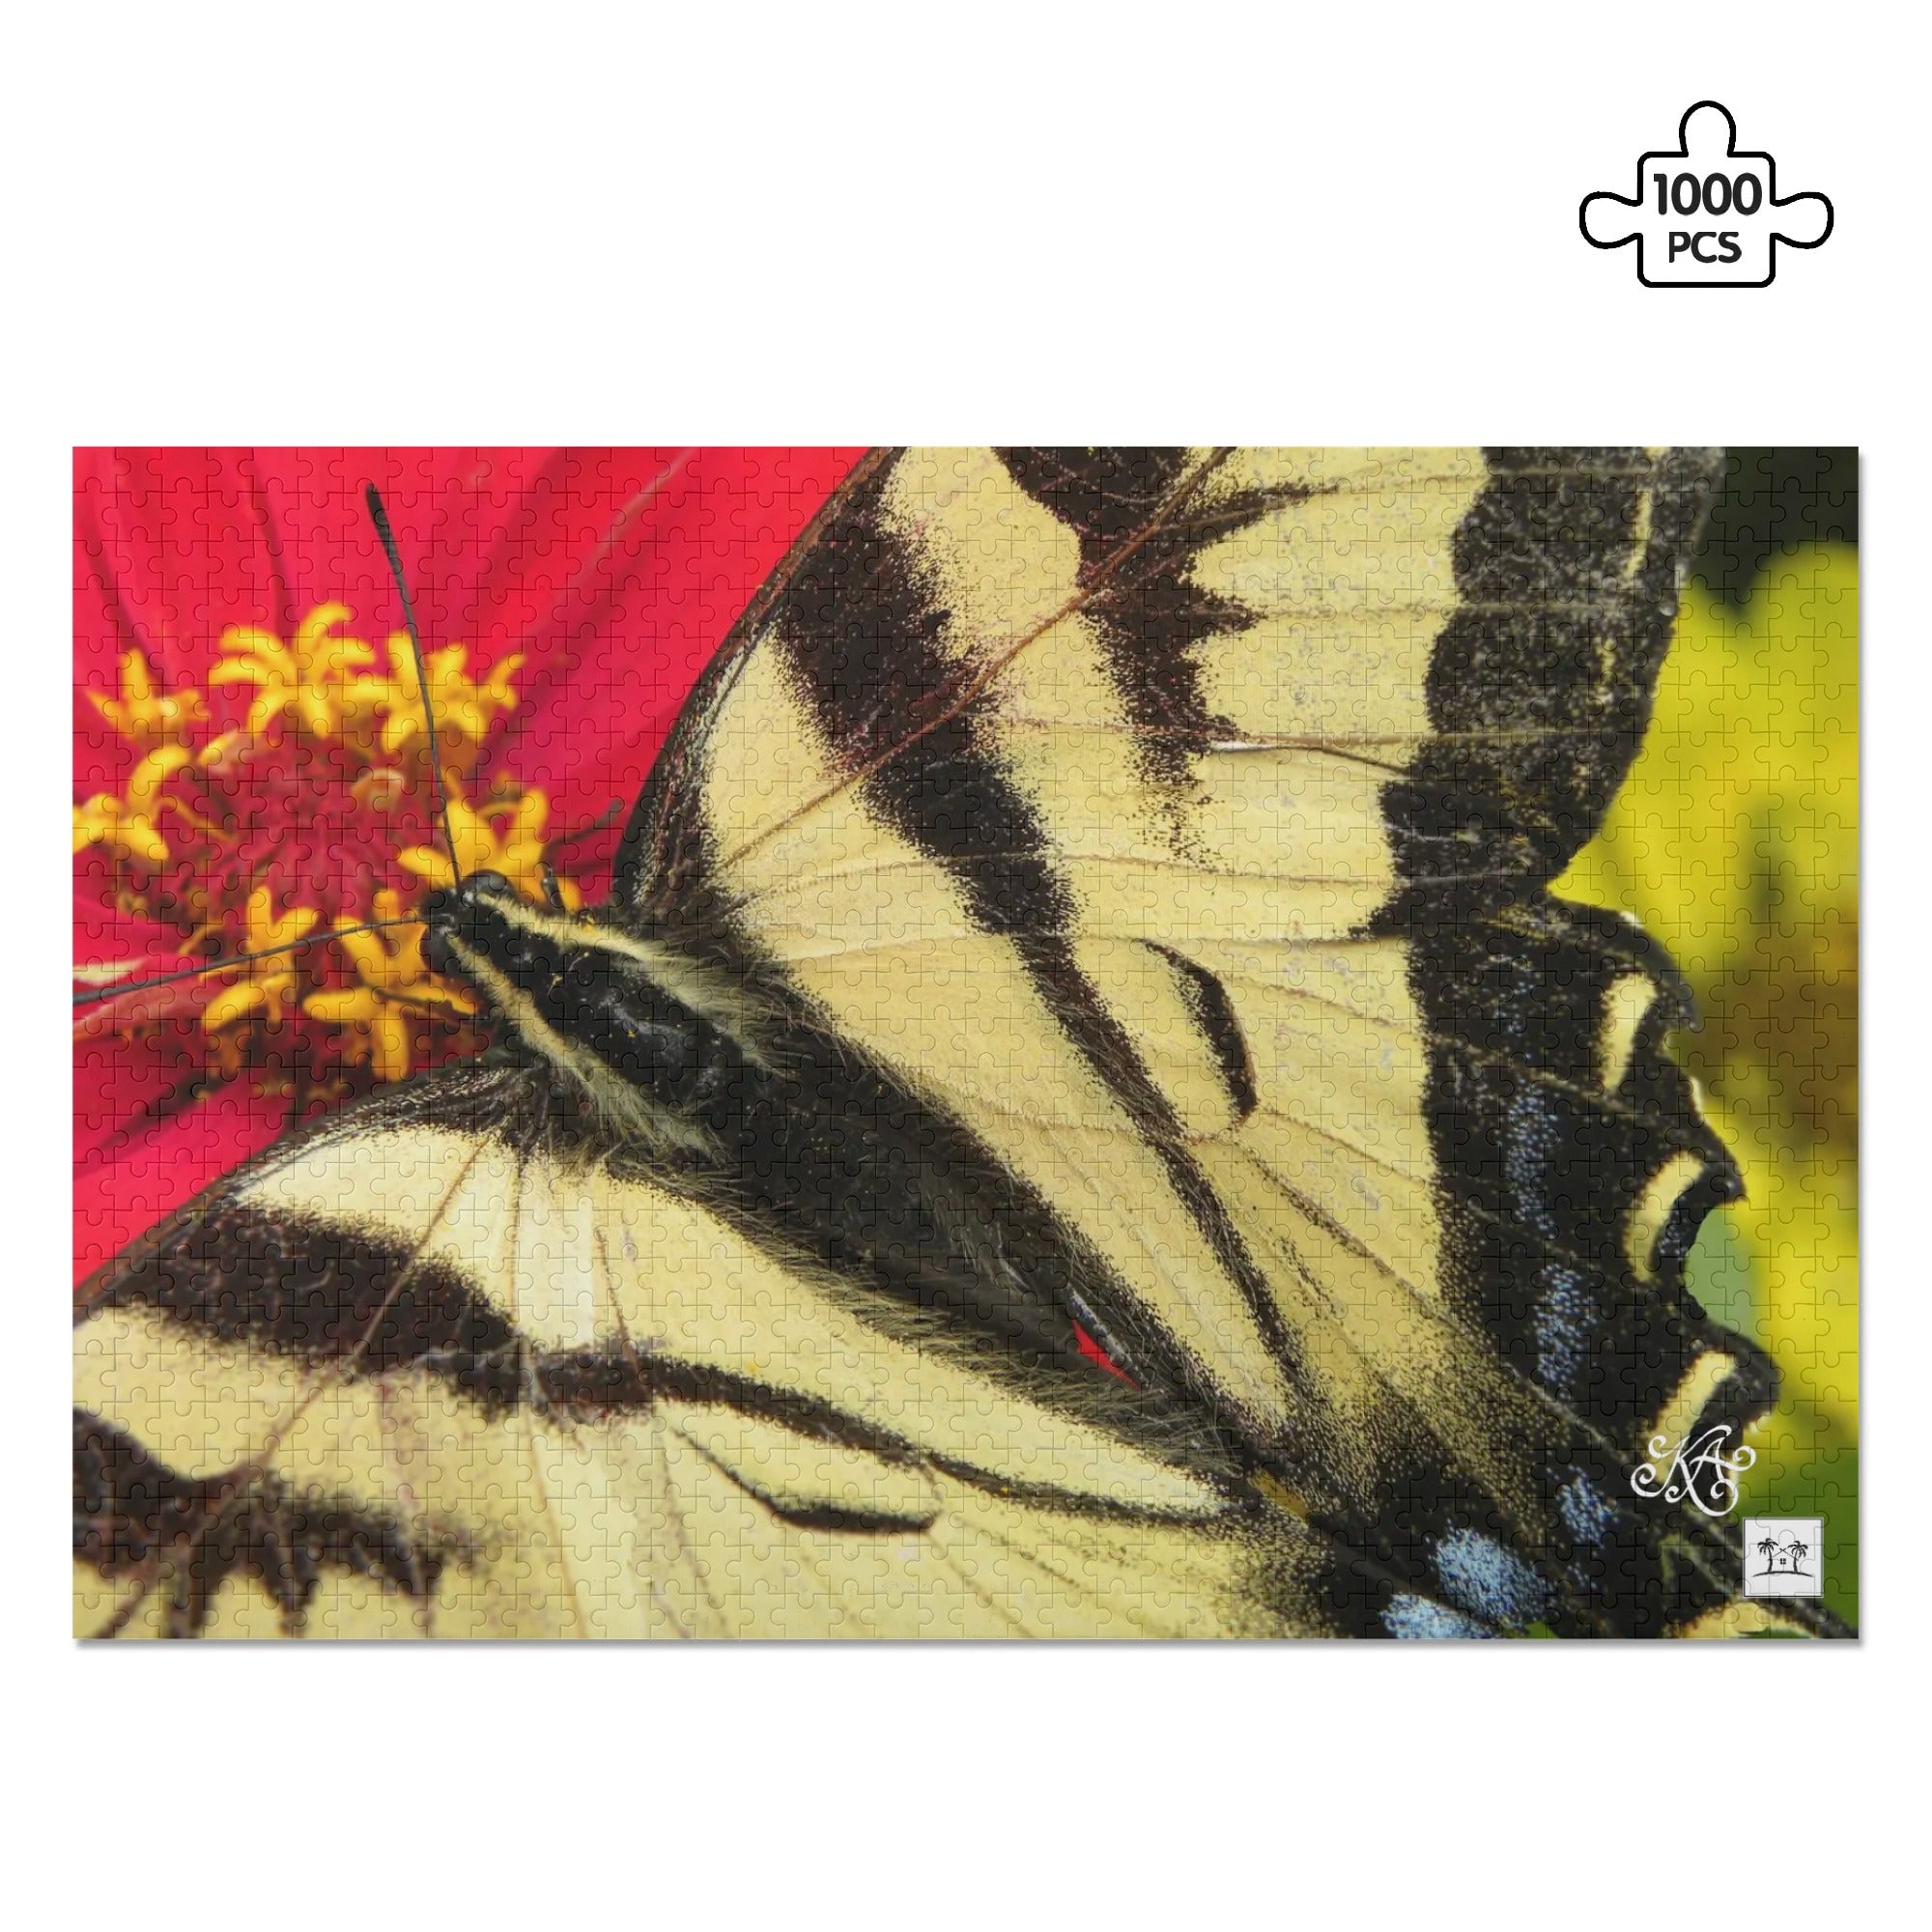 Wooden Jigsaw Puzzle (1000 Pcs) - Fragile Wings